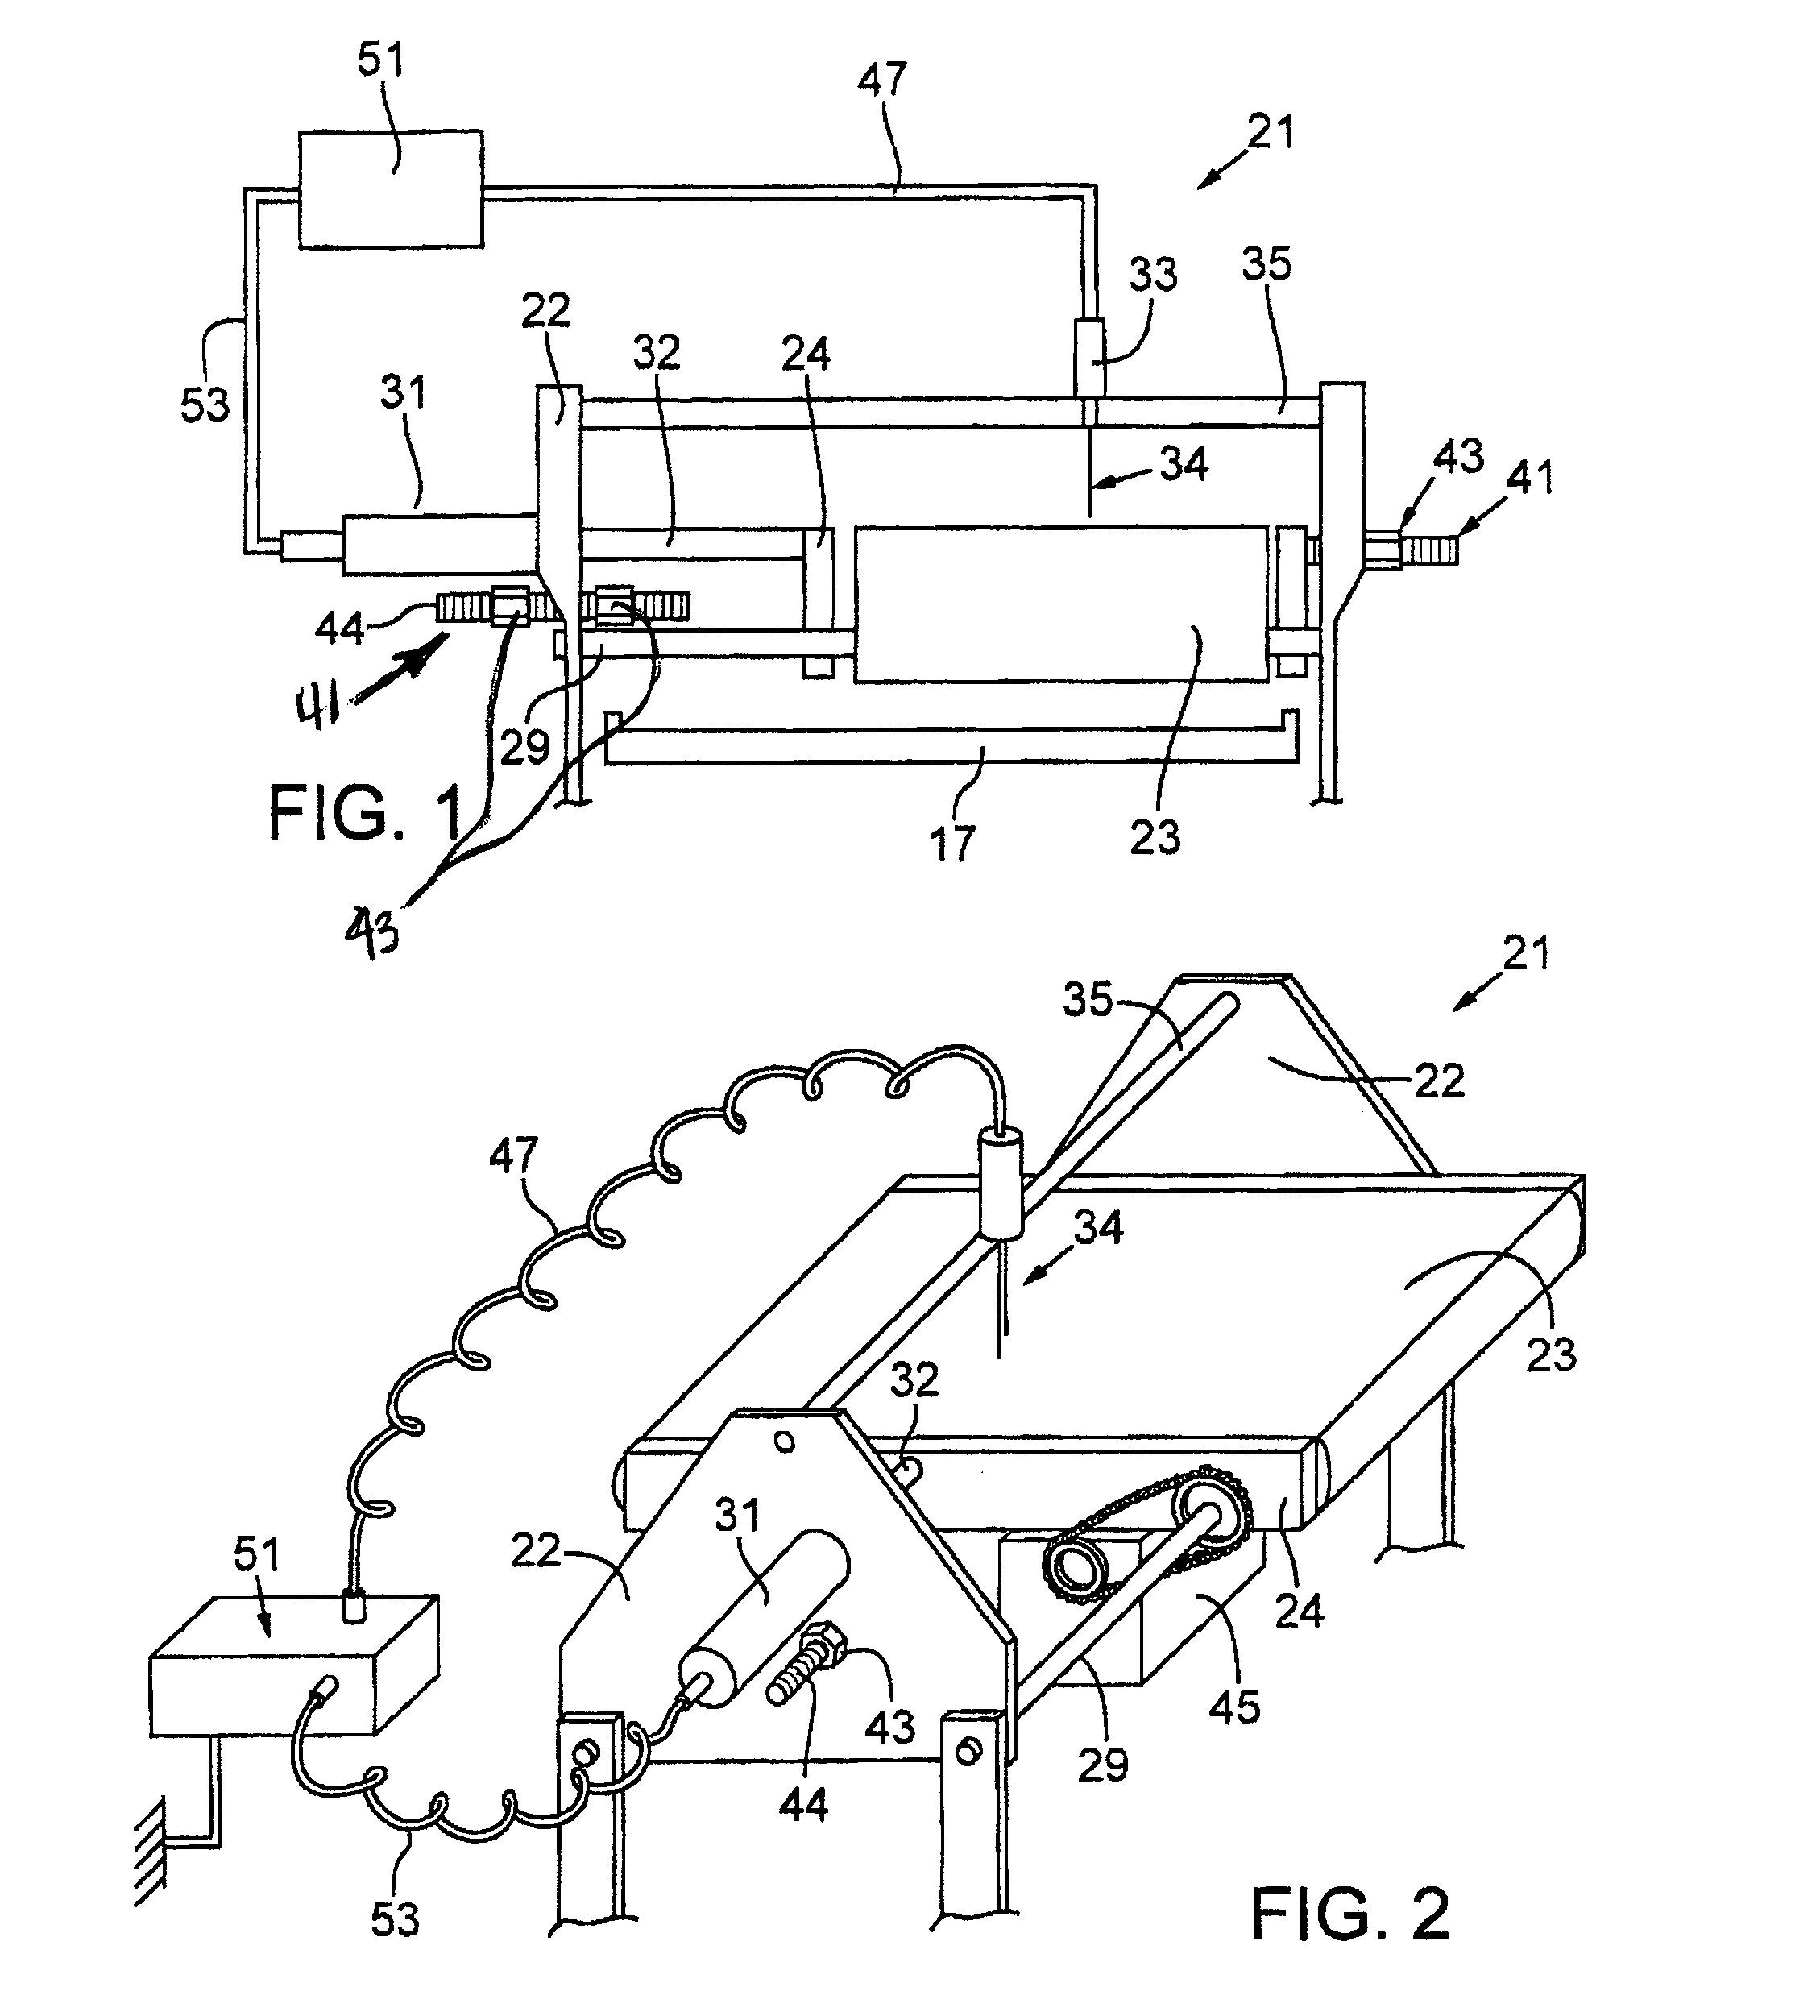 Systems and methods for compact arrangement of foodstuff in a conveyance system